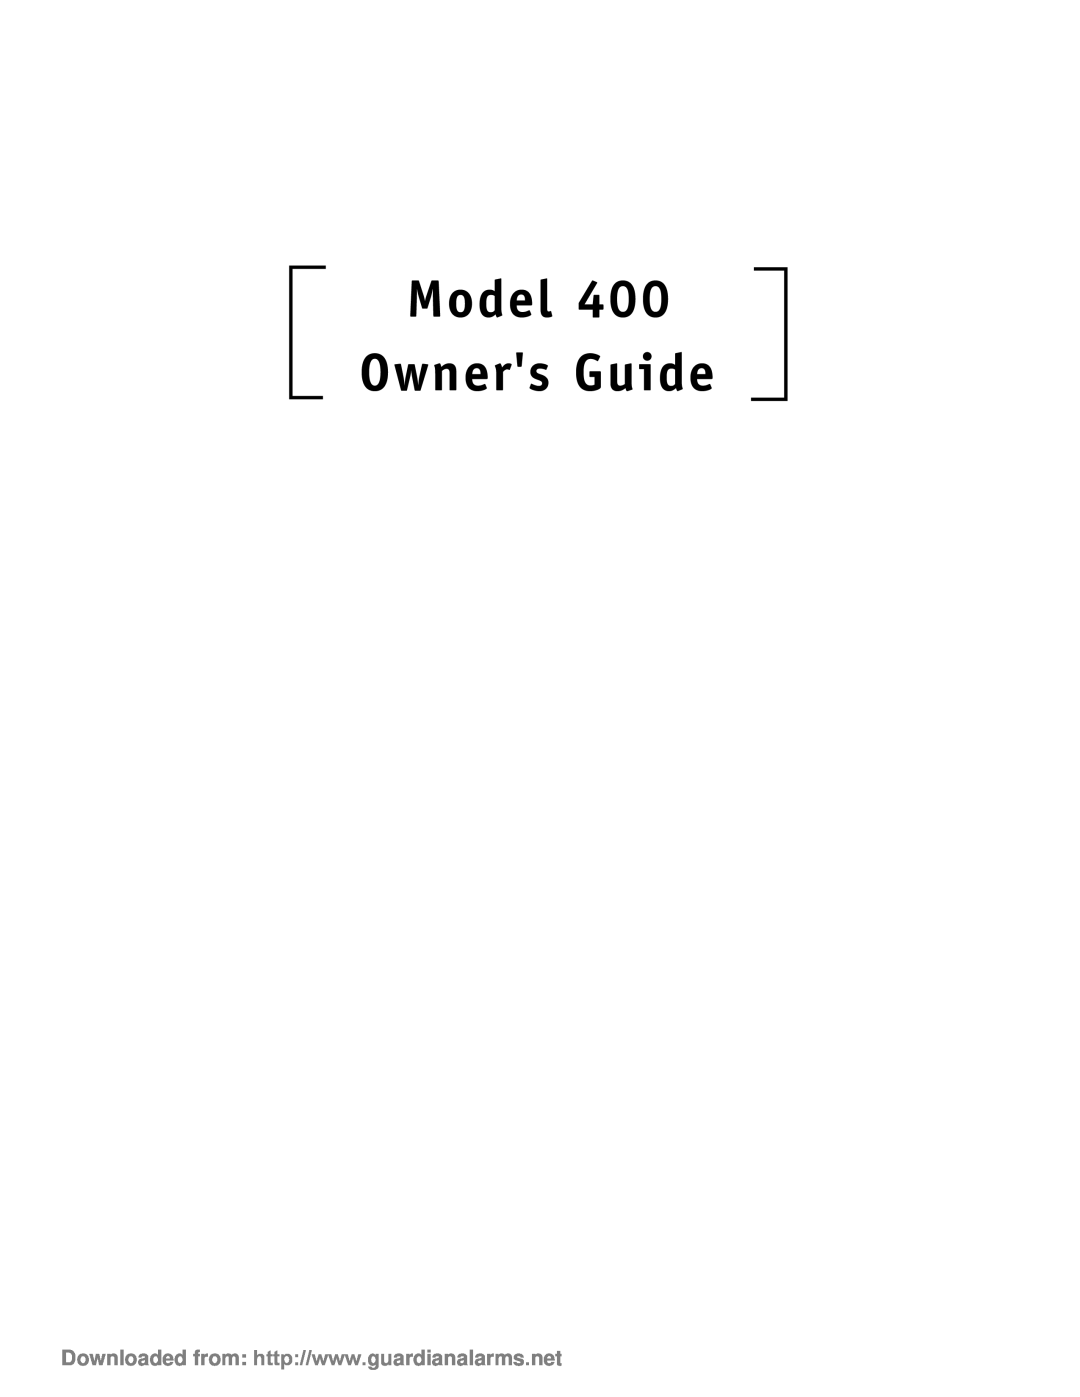 Directed Electronics Model 400 manual Model Owners Guide 